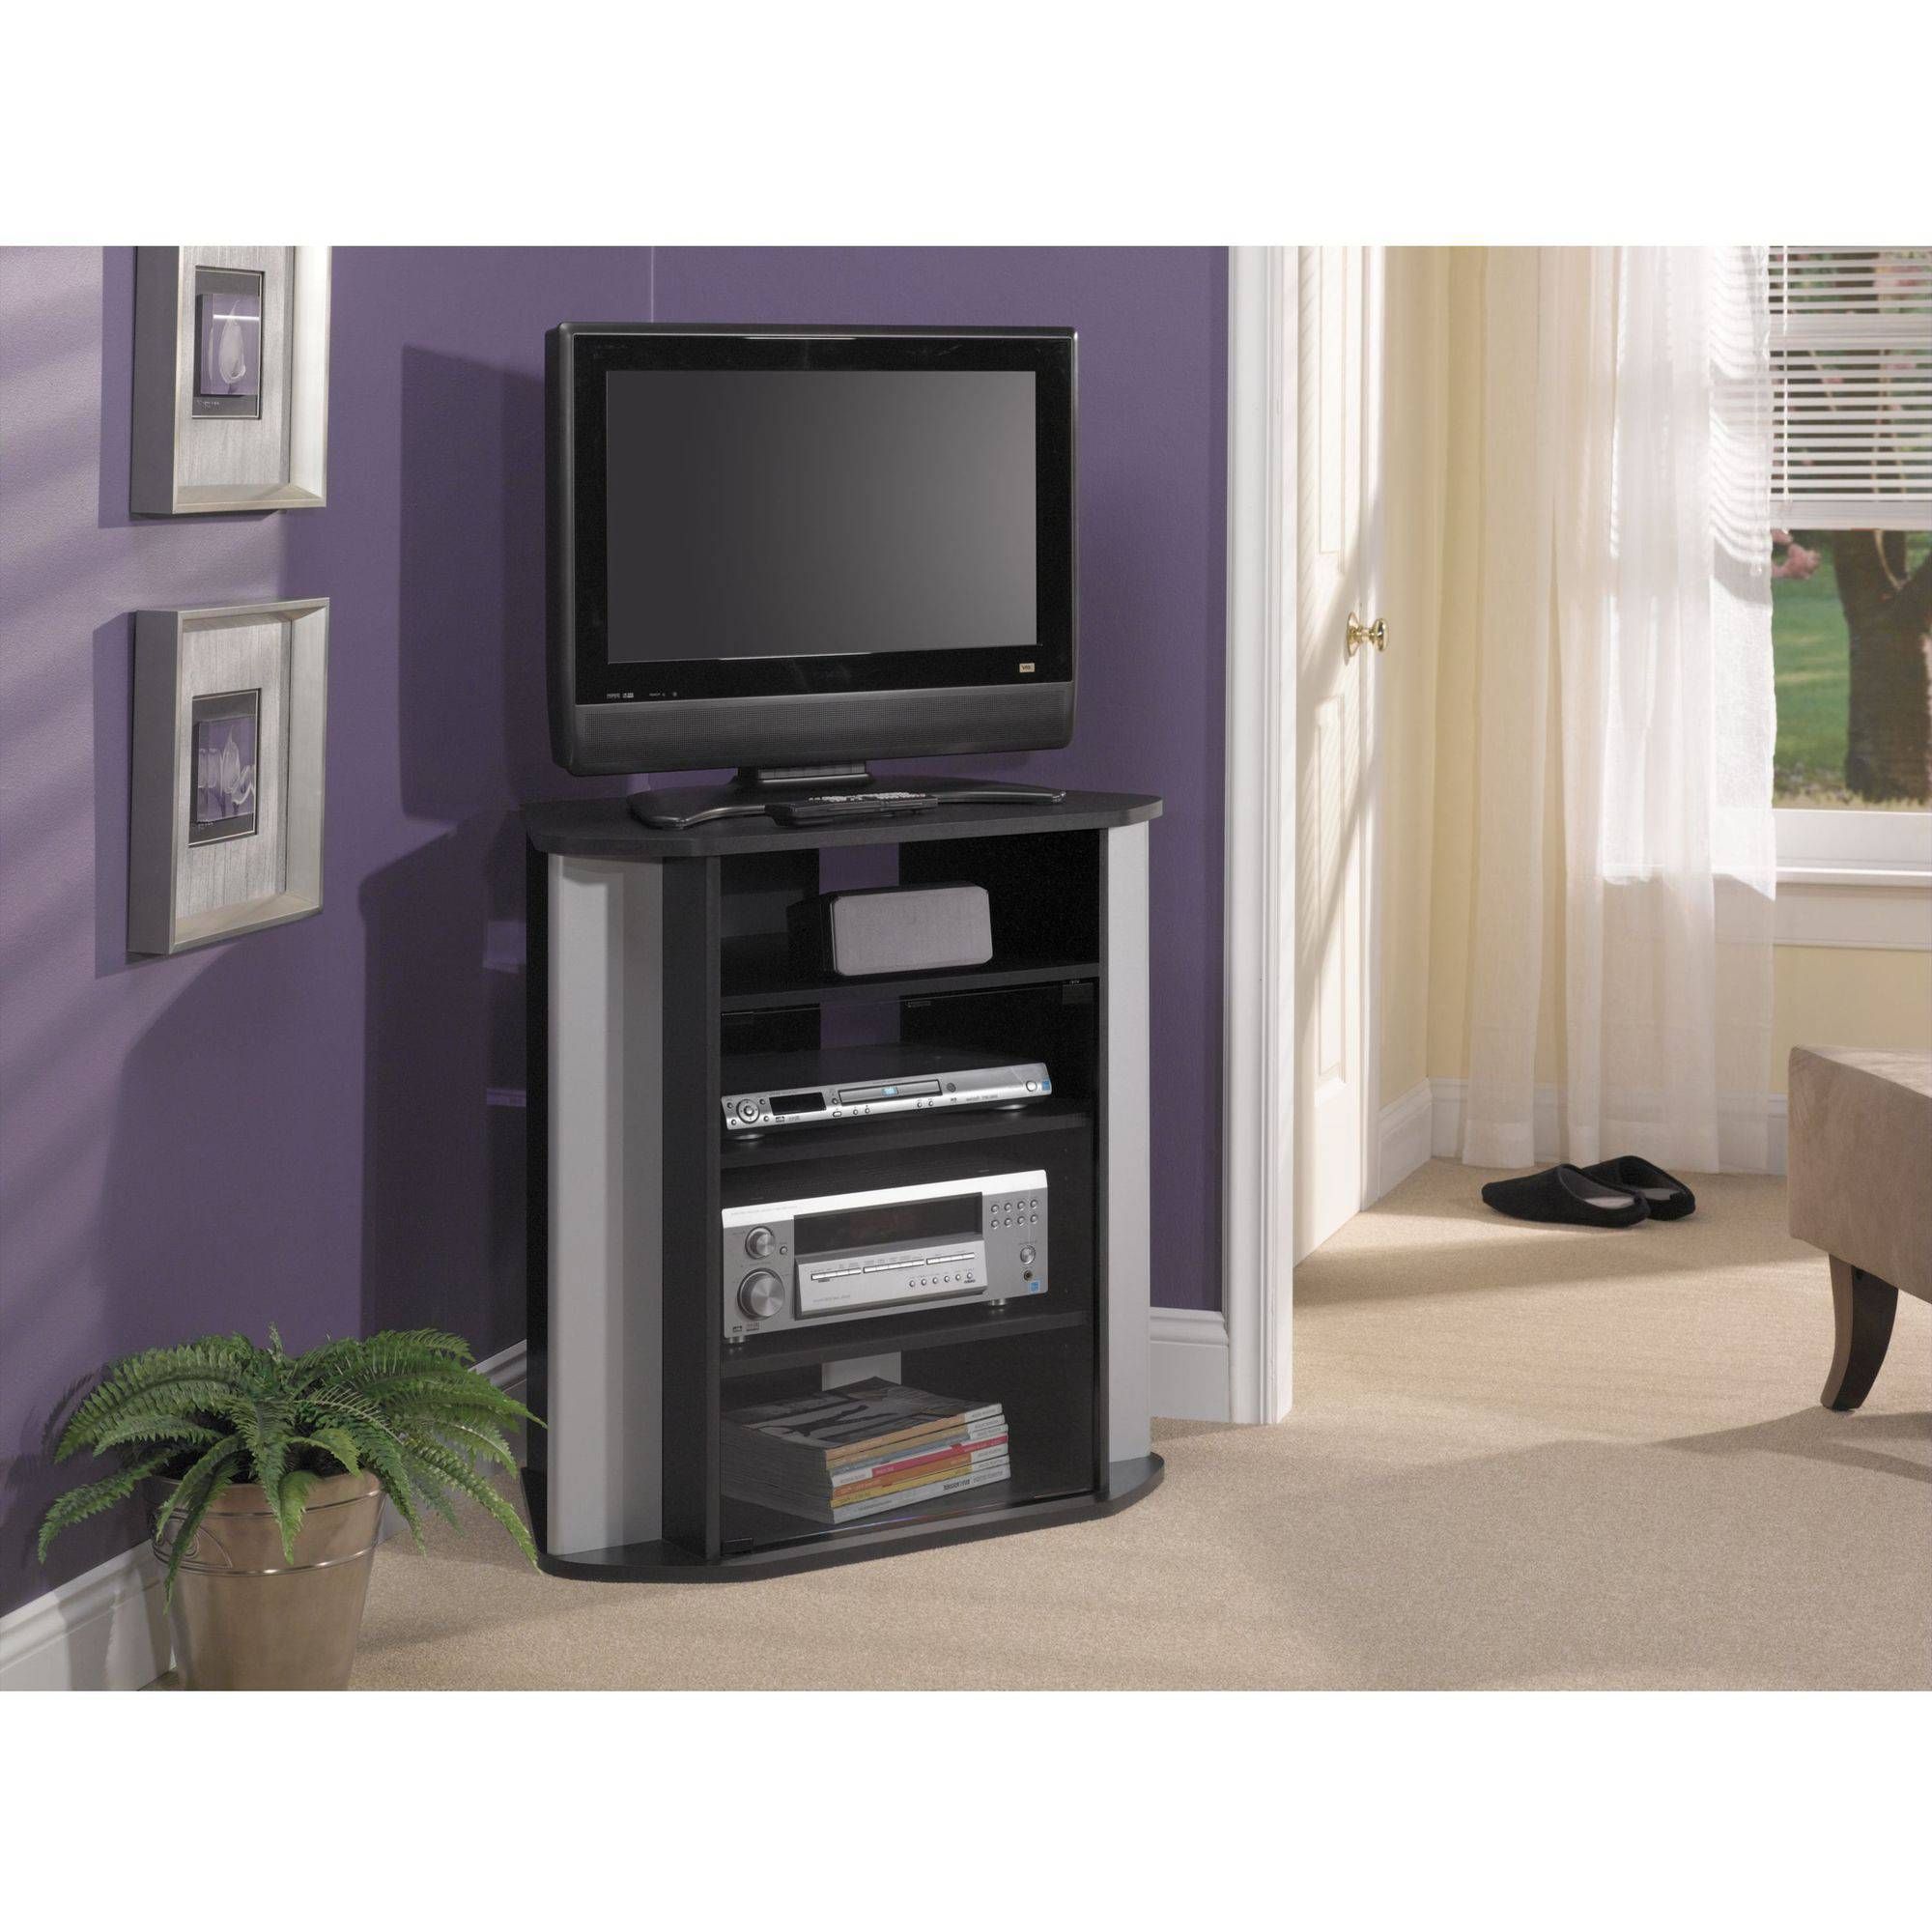 Widely Used Furniture: Wonderful Mainstays Tv Stand For Home Tv Stand Furniture Intended For Tv Stands For Tube Tvs (View 9 of 20)